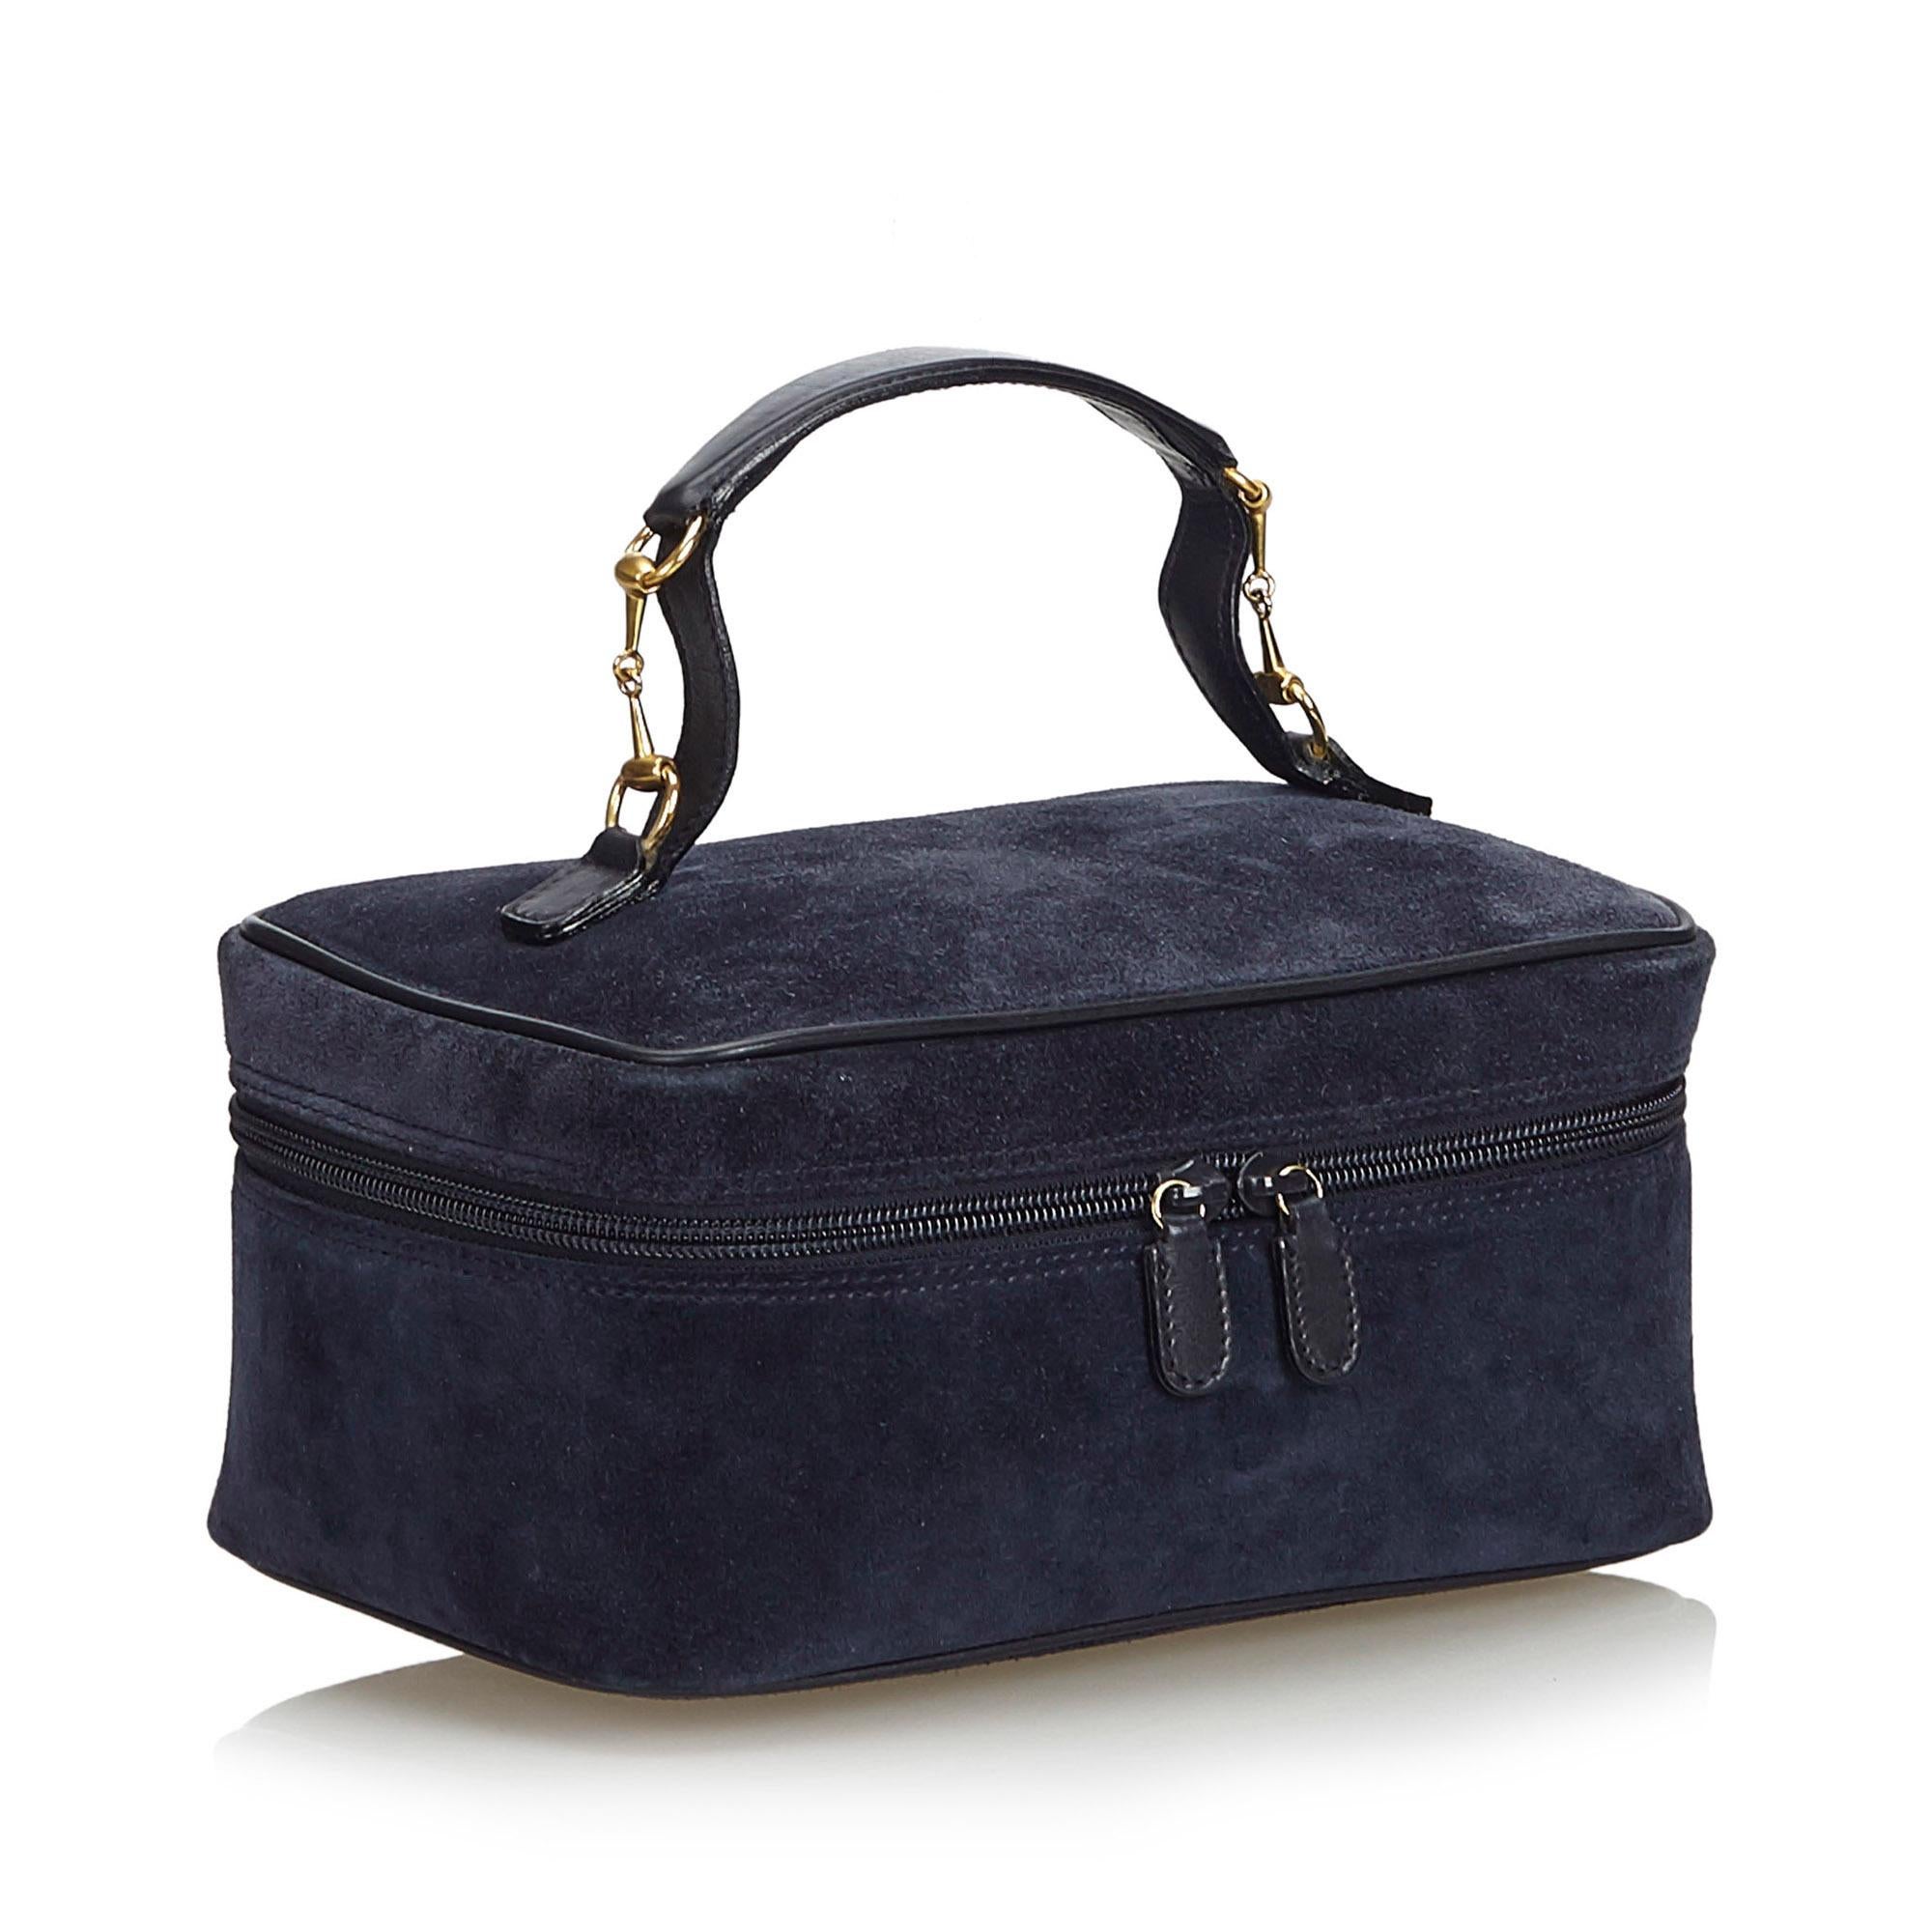 This vanity bag features a suede body with leather trim, a leather top handle with gold-tone horse bit hardware, and a top zip around closure. It carries as B+ condition rating.

Inclusions: 
This item does not come with